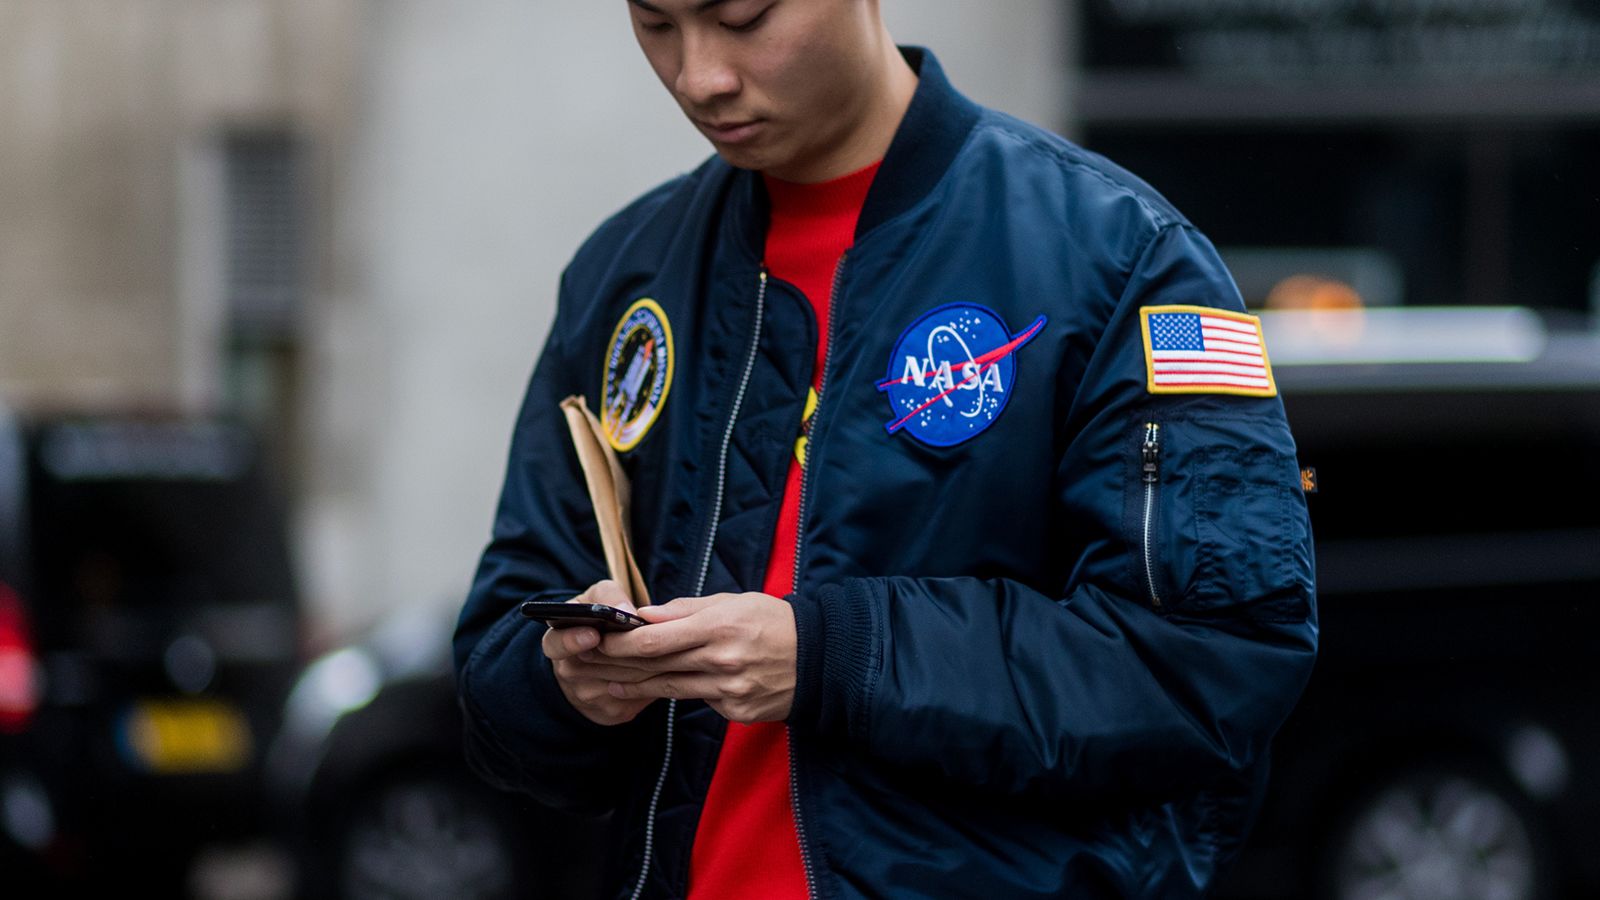 The latest in NASA fashion: Photo of the Day - Roll Call